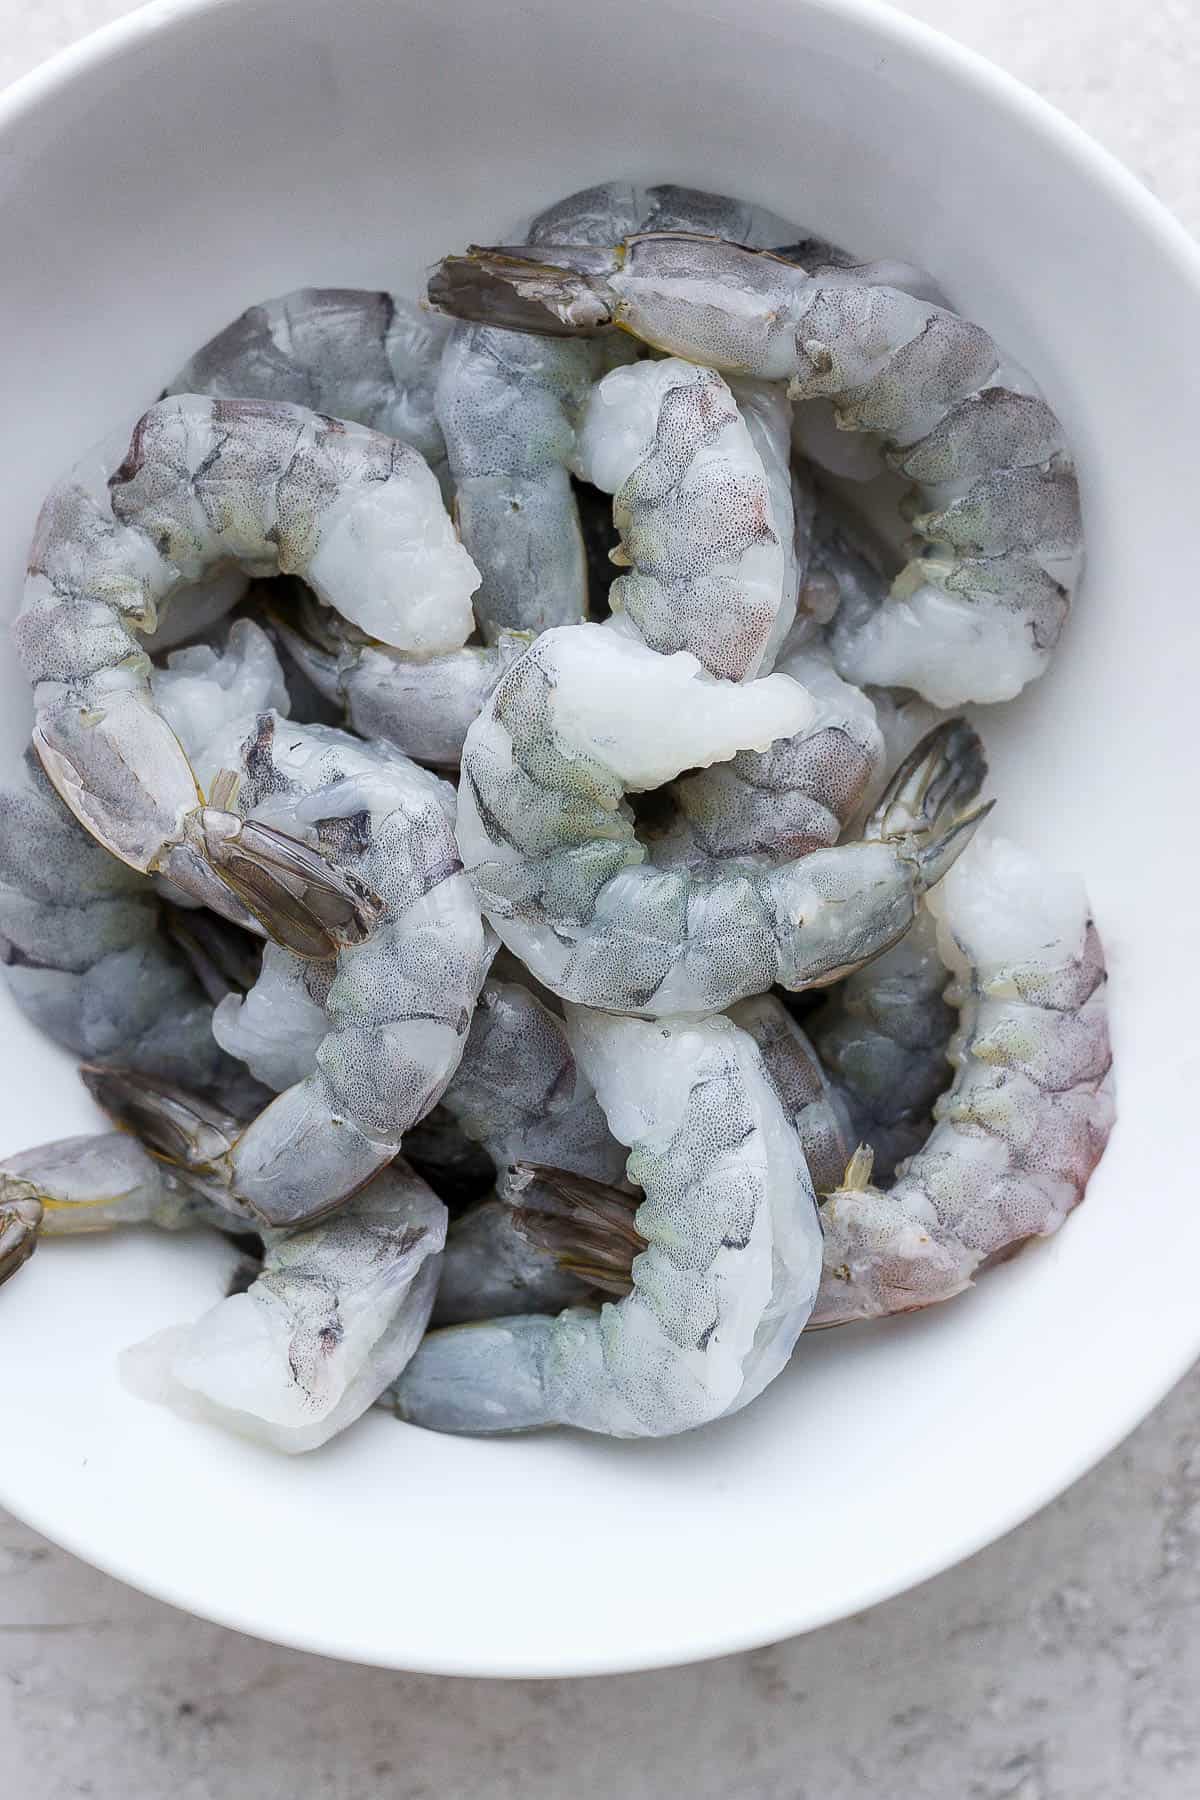 Fresh shrimp with the tails on in a white bowl.